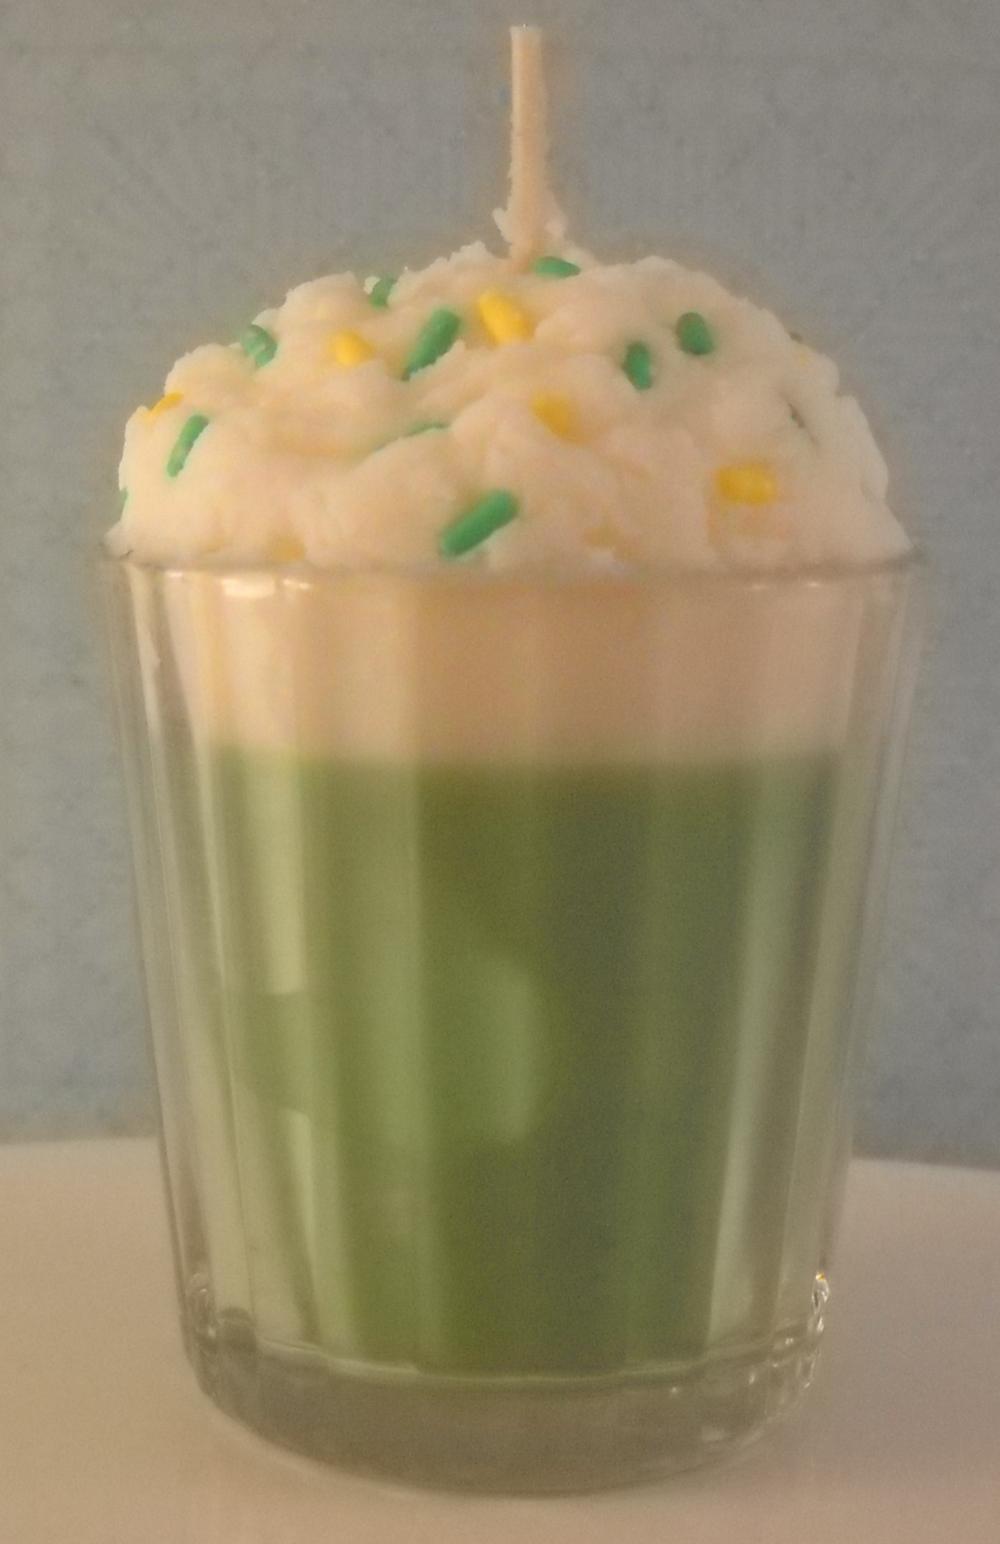 Votive Milkshake Candle Sweet Honey Dew Scented Made With All Natural Soy Wax